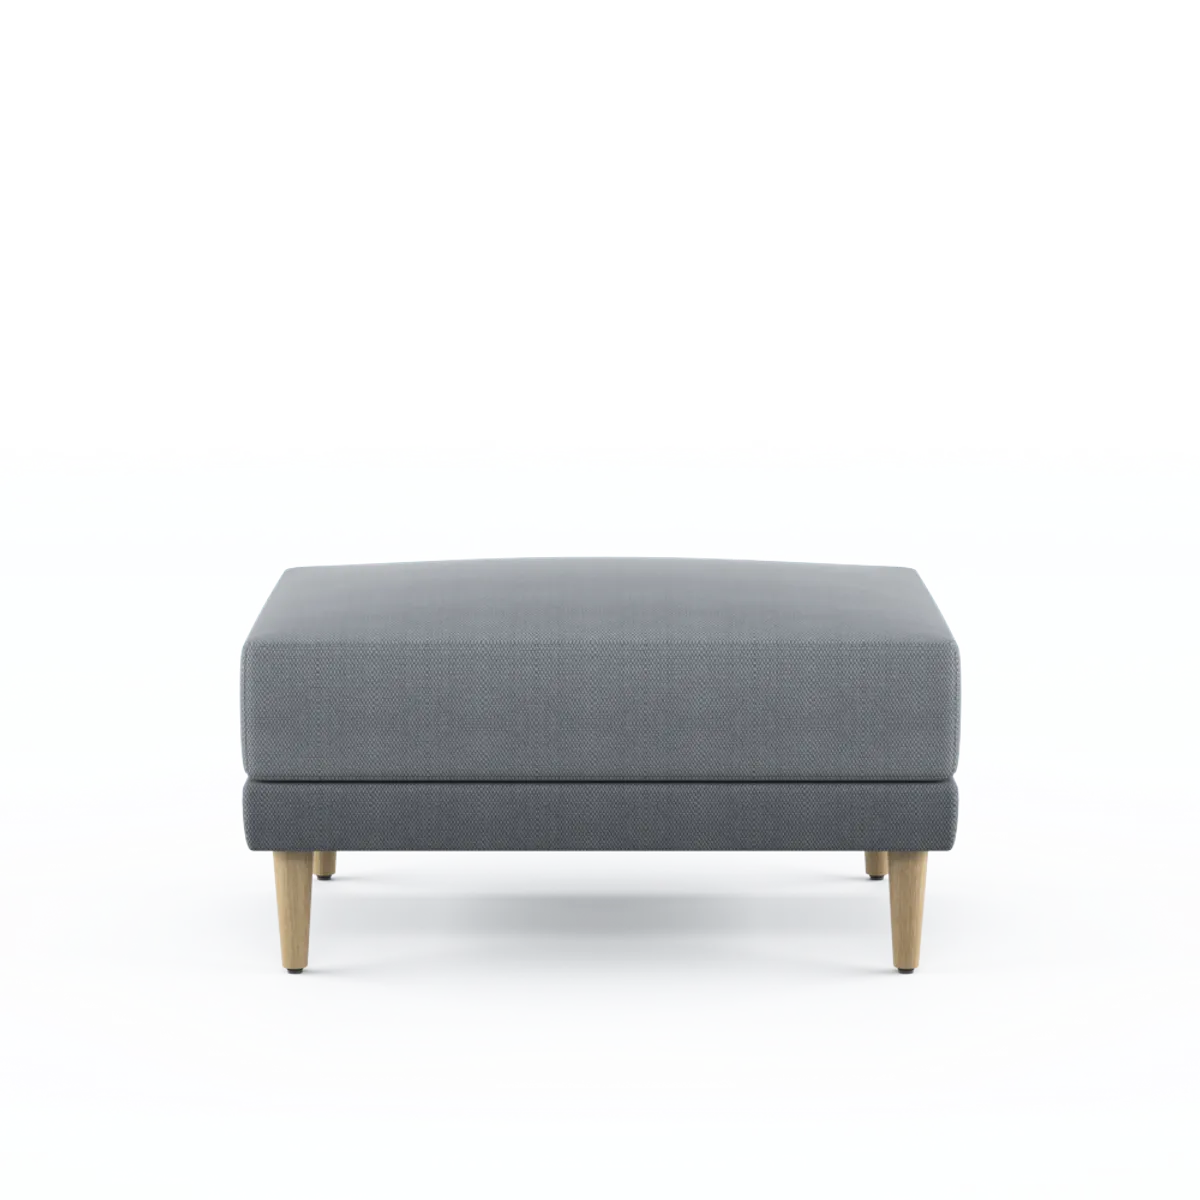 Bespoke Pollen Ottoman Inside Out Contracts 2502